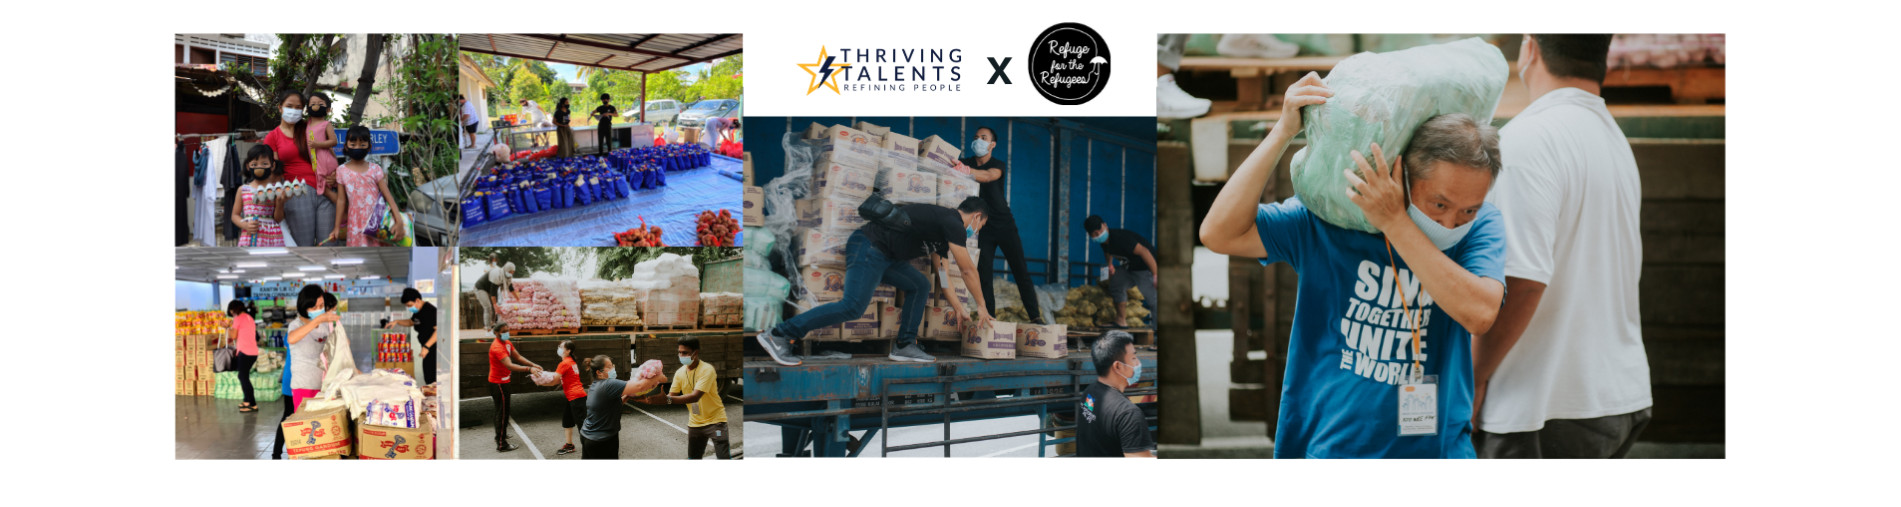 Thriving Talents X Refuge For The Refugees